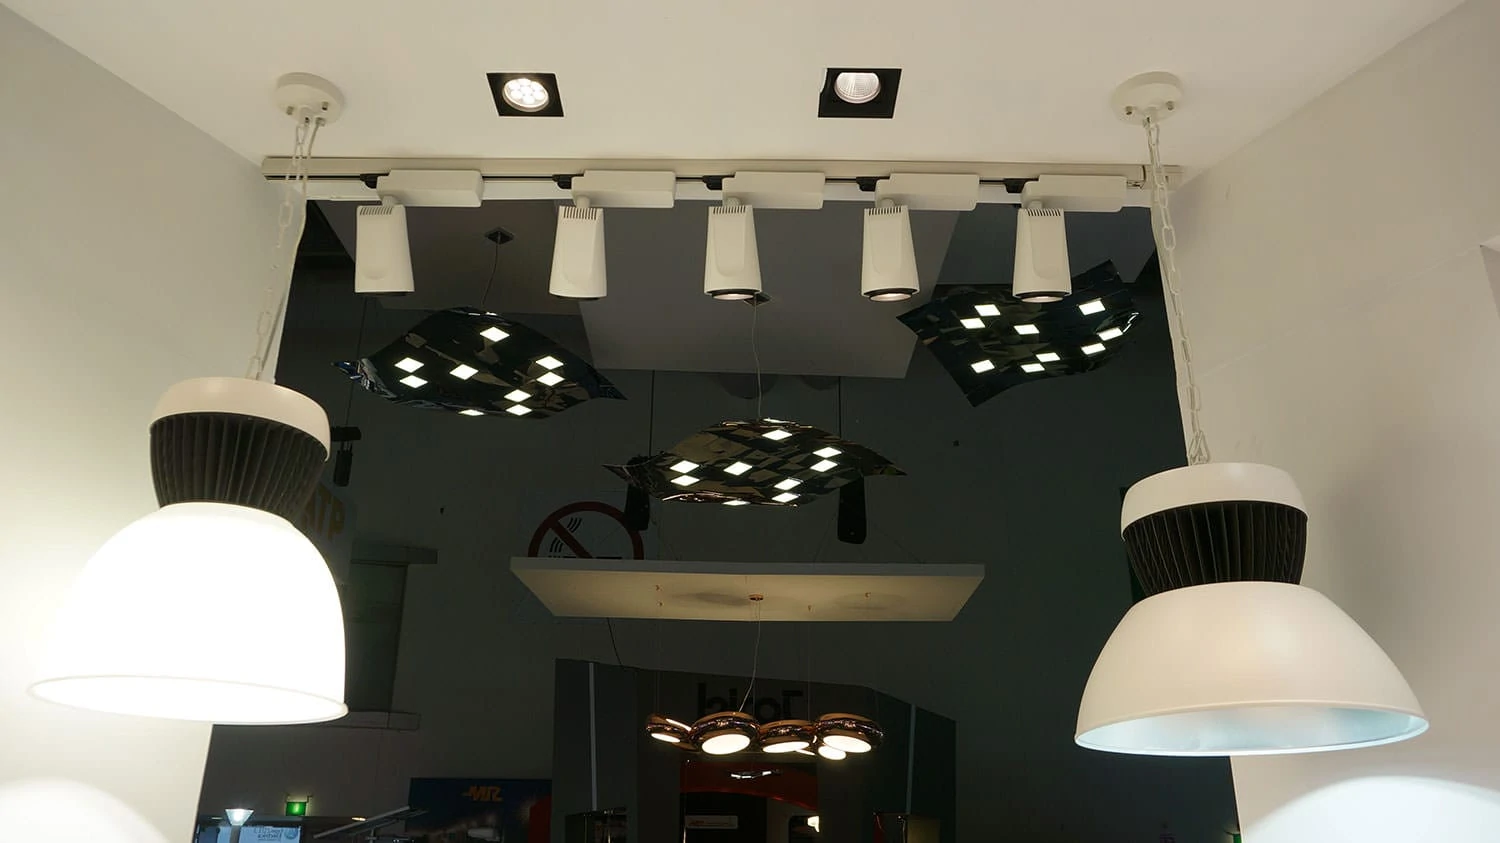 Three pendant OLED luminaires Pixelate hanging from a ceiling